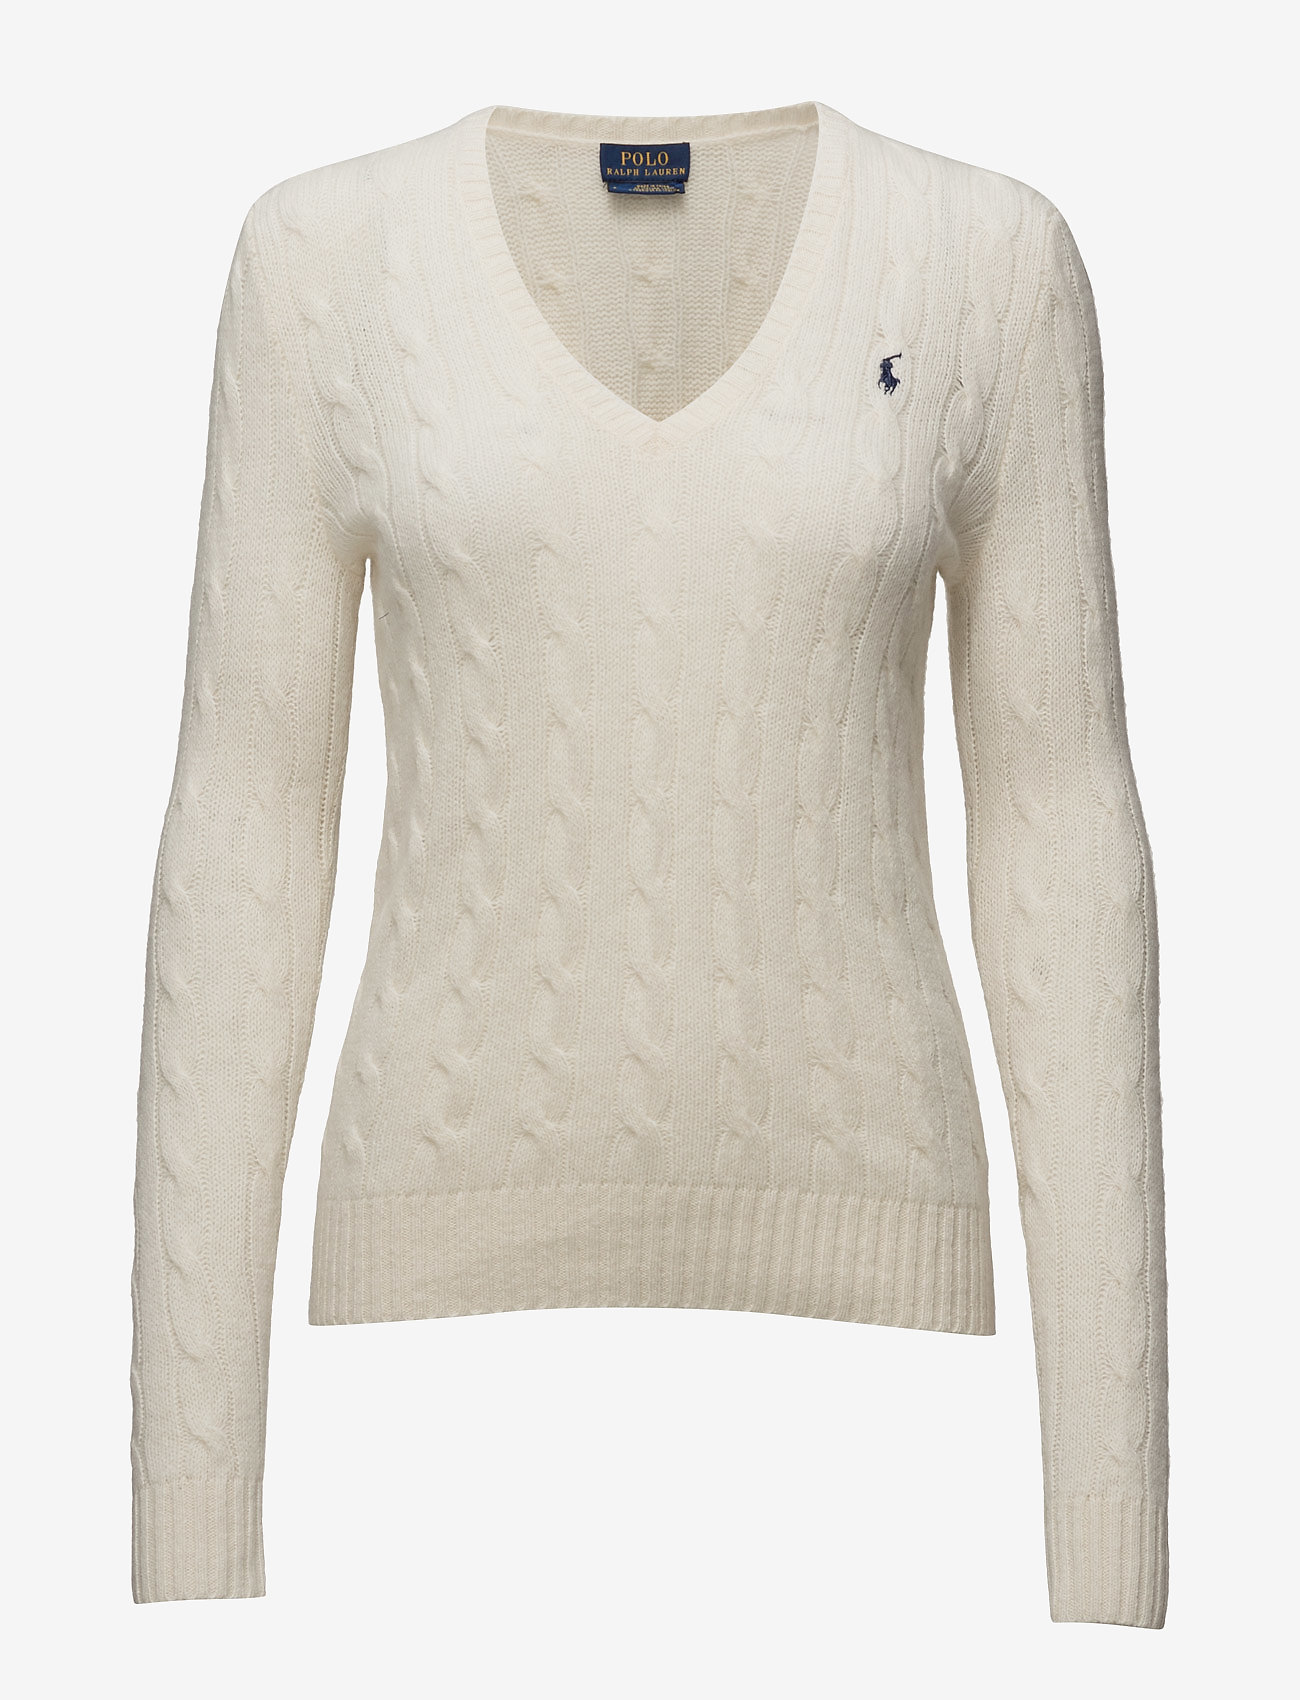 Polo Ralph Cable Wool-cashmere Sweater (Cream) - 1199 kr | Boozt.com